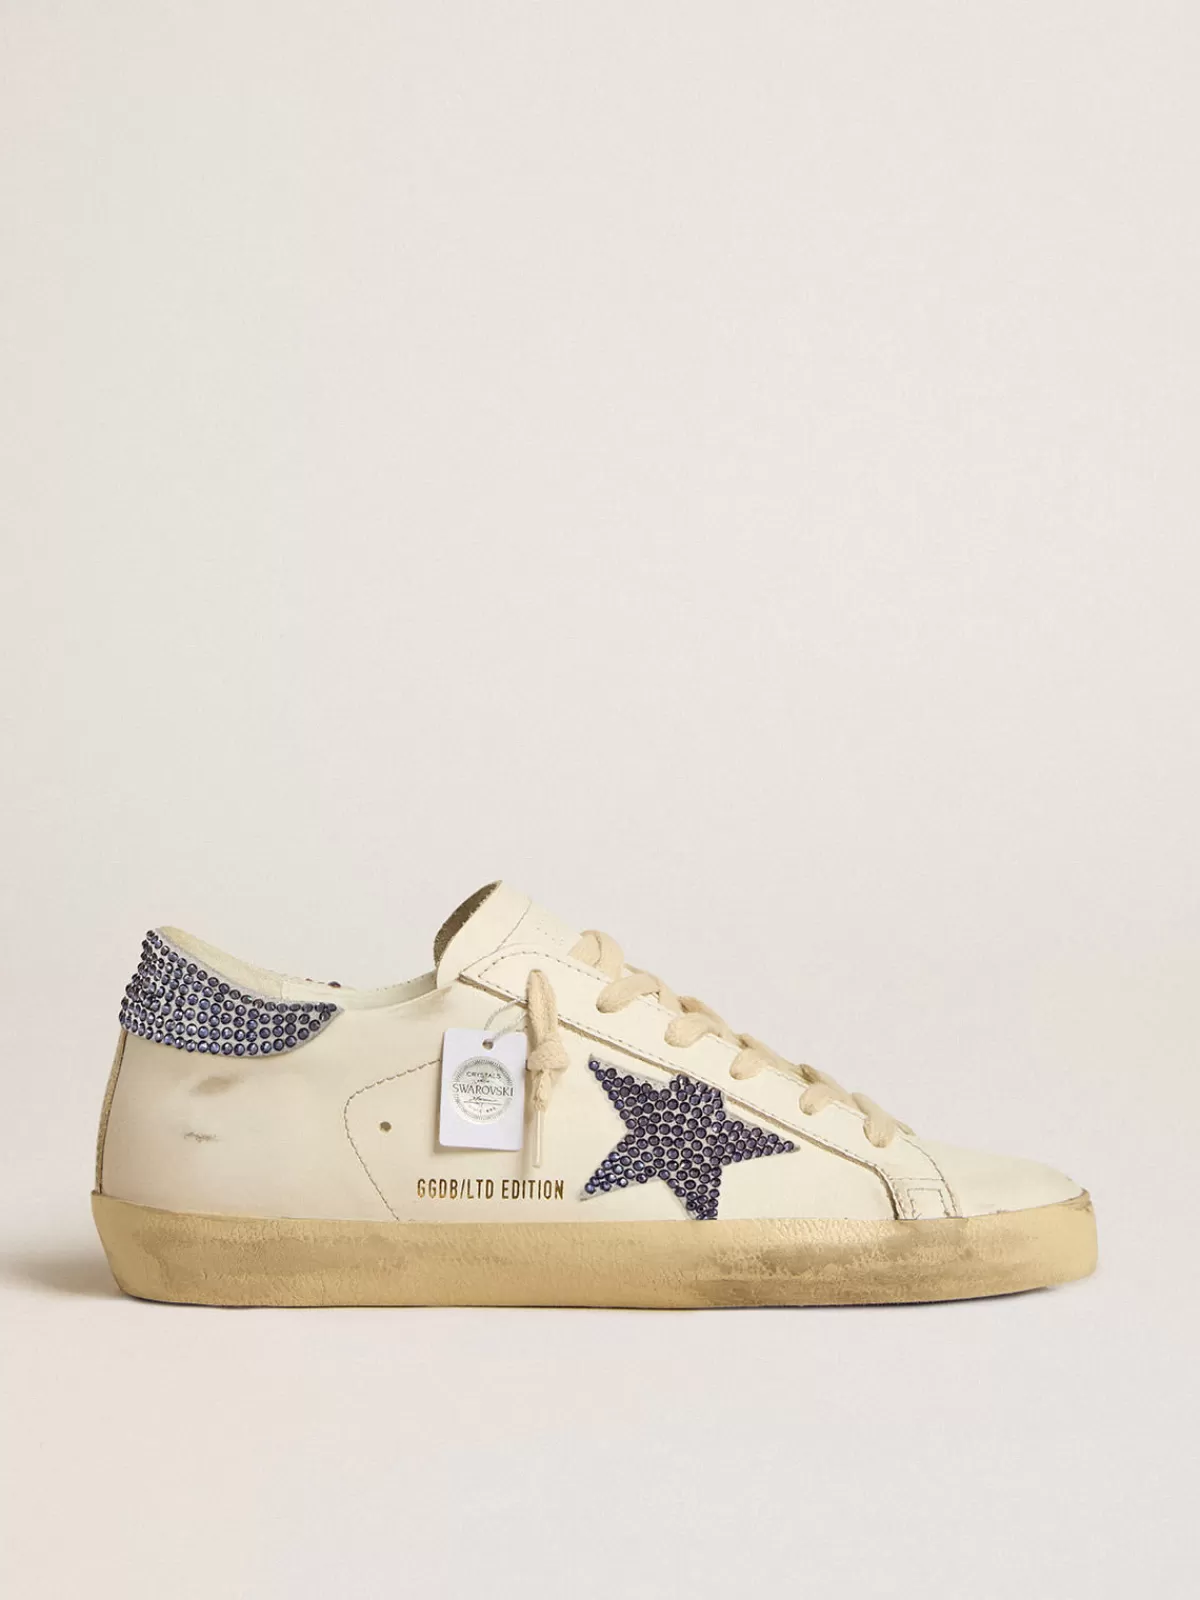 Golden Goose Woman's Super-Star LTD with suede star and heel tab with Swarovski crystals white Shop